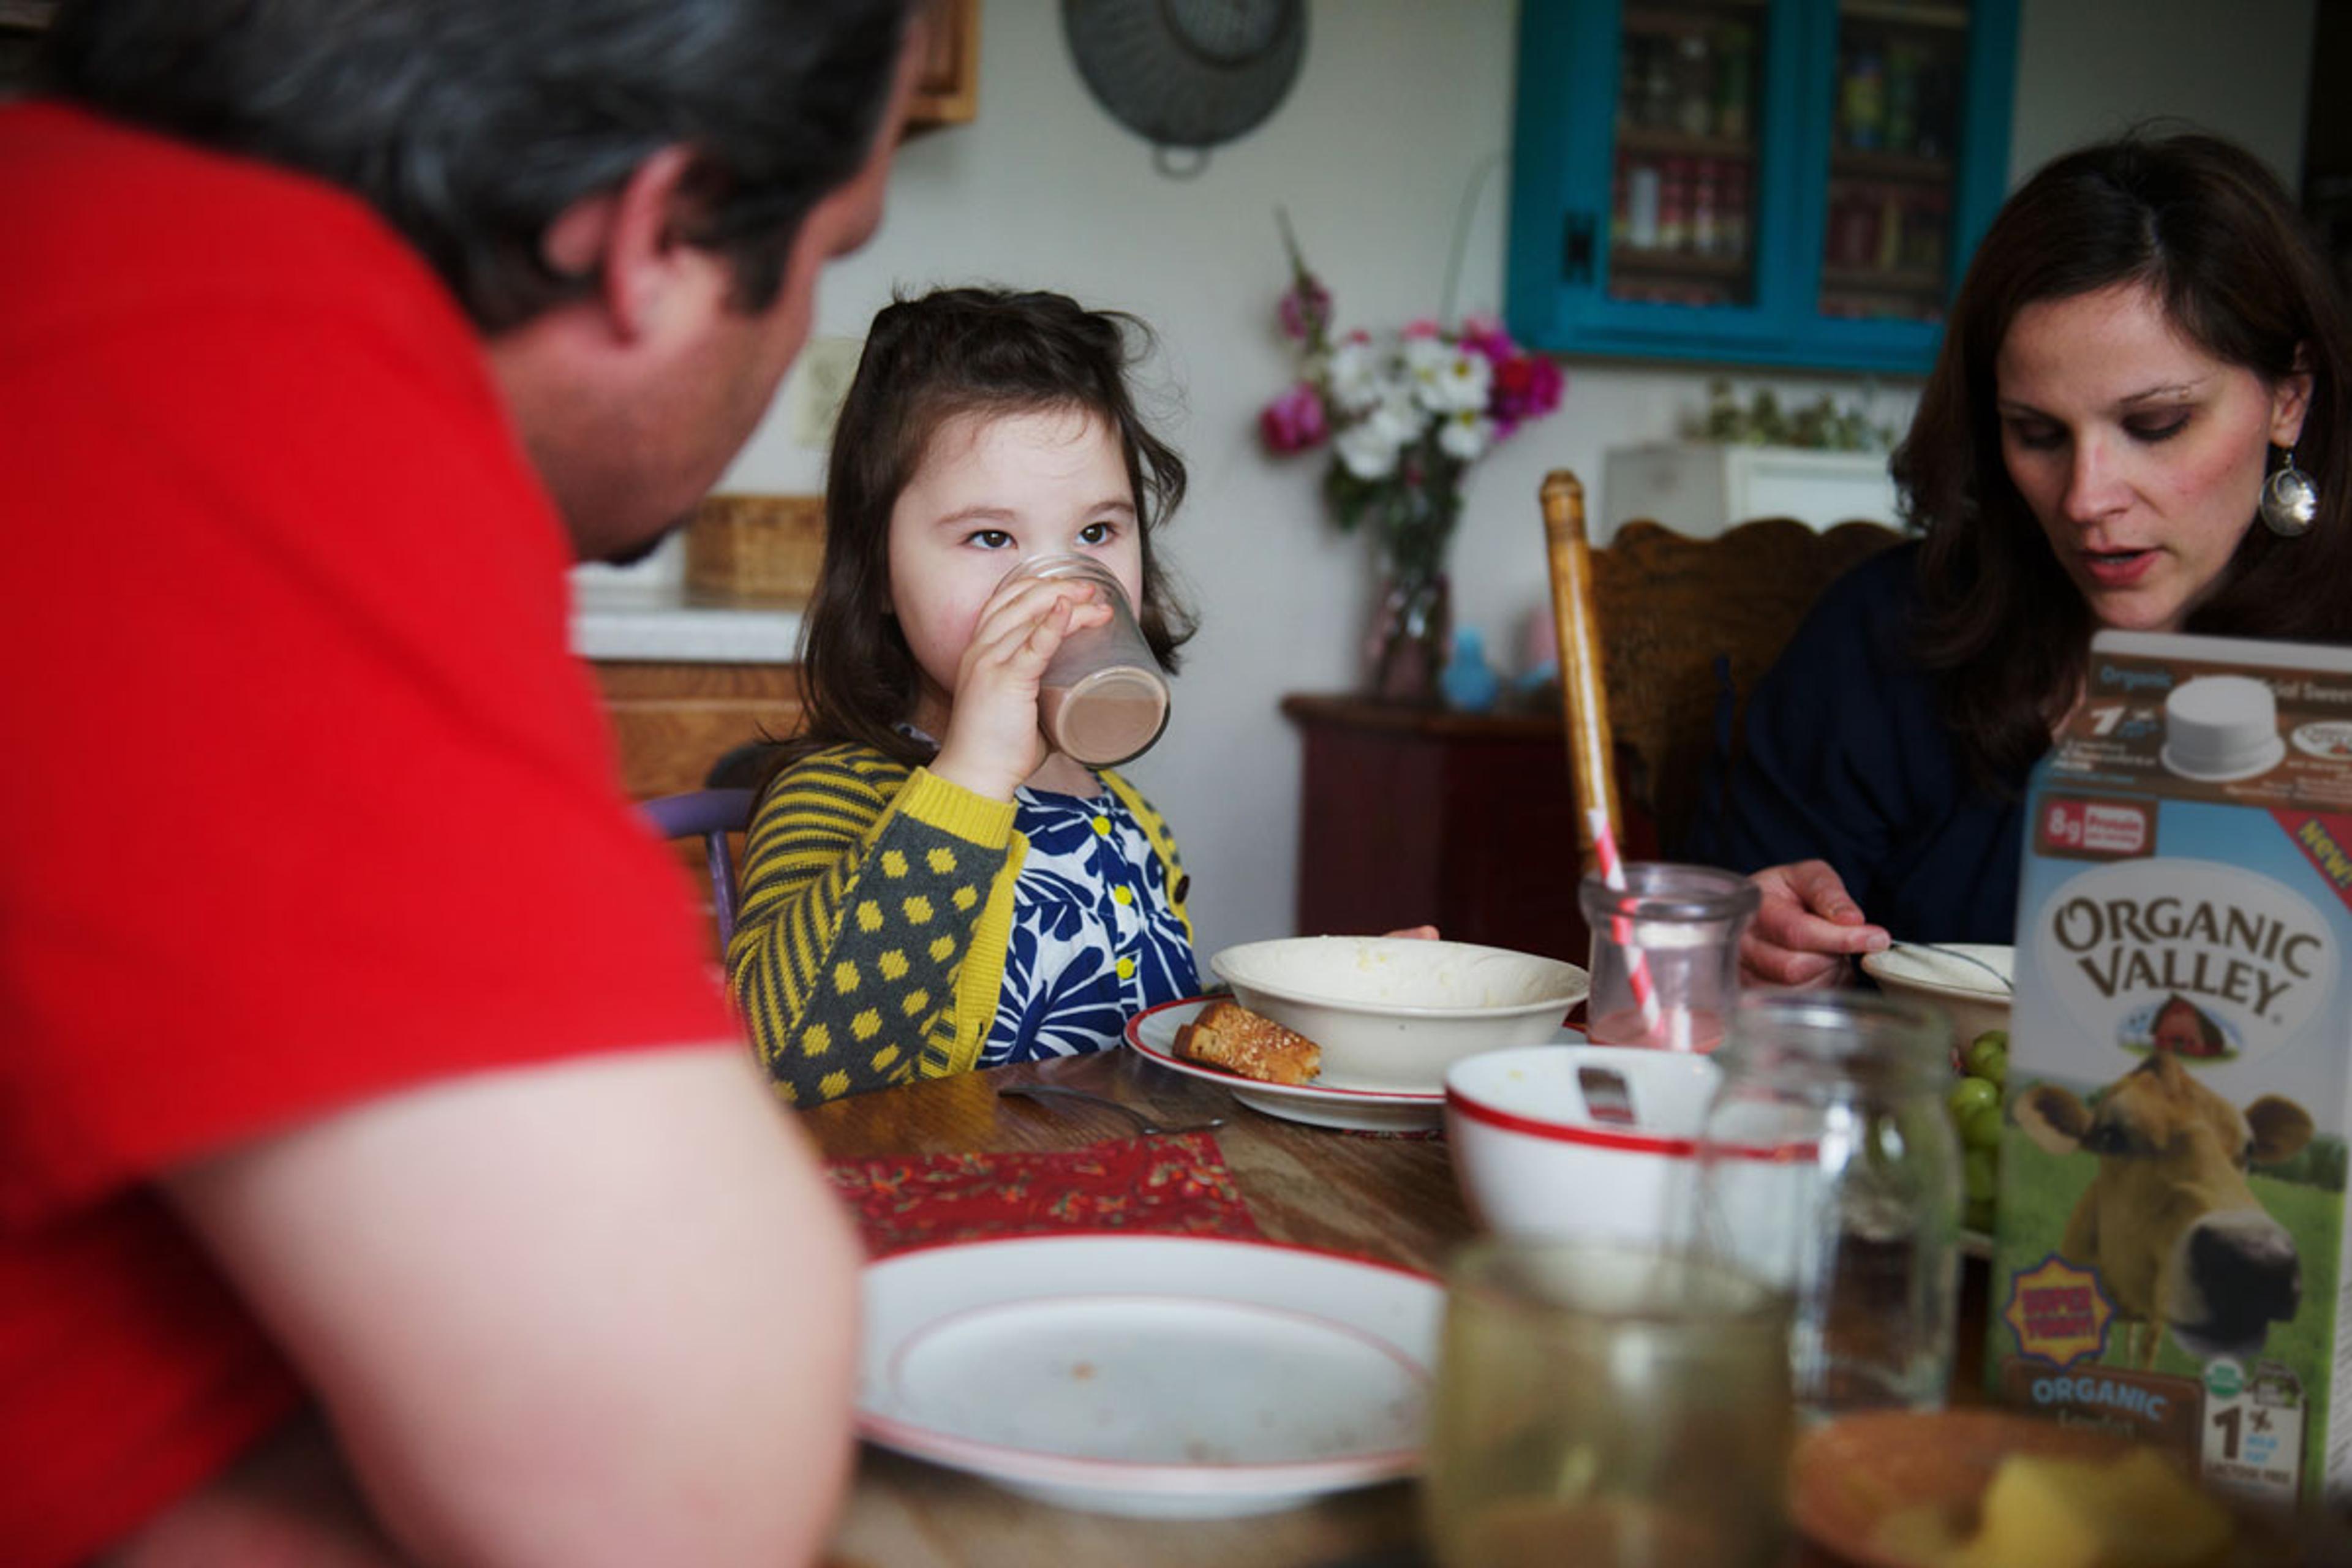  A family is eating at the dinner table, and a little girl is drinking chocolate milk.